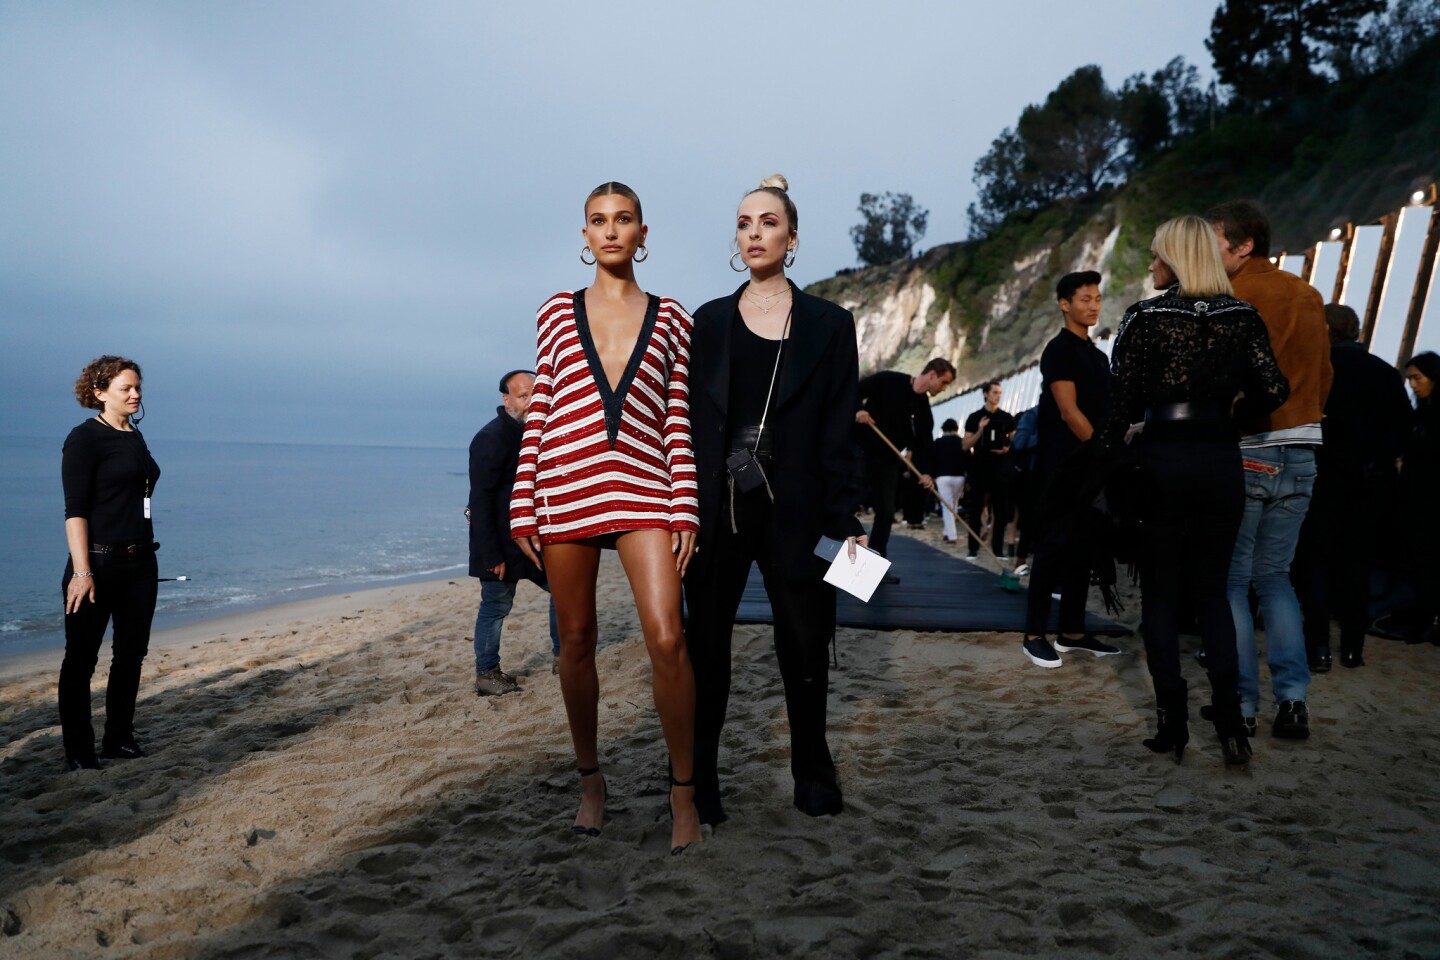 Model Hailey Bieber and guest attend the spring/summer 2020 menswear collection show by Belgian designer Anthony Vaccarello for Saint Laurent in Malibu.